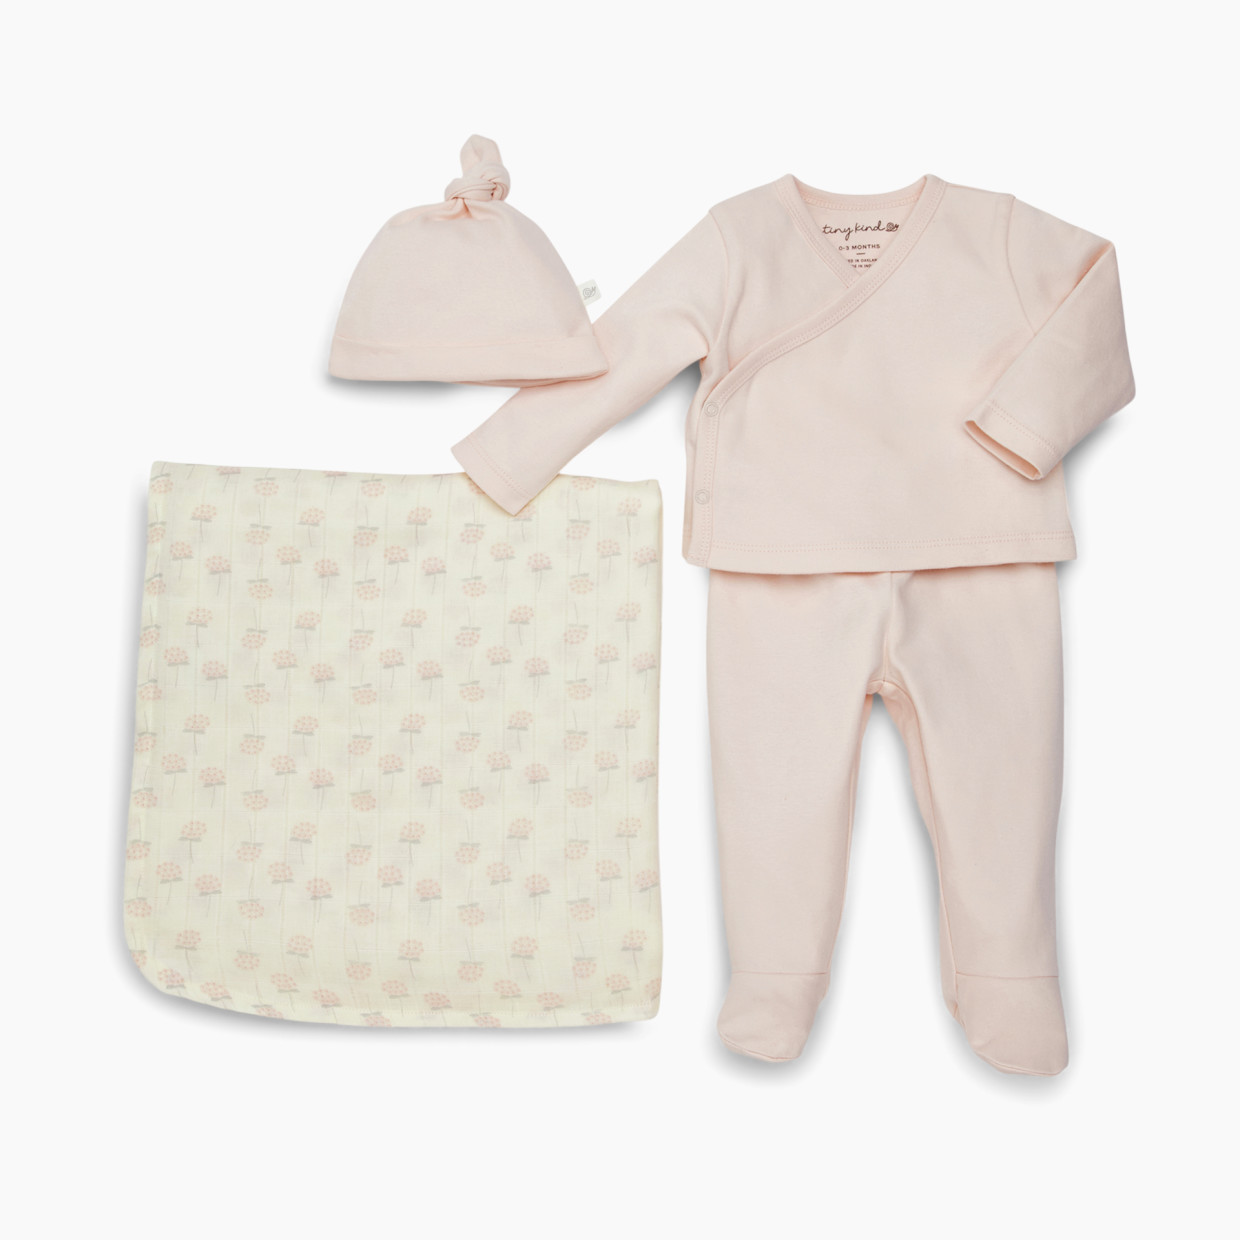 Tiny Kind The New Arrival 4 Piece Set - Floral Bunch, Nb.